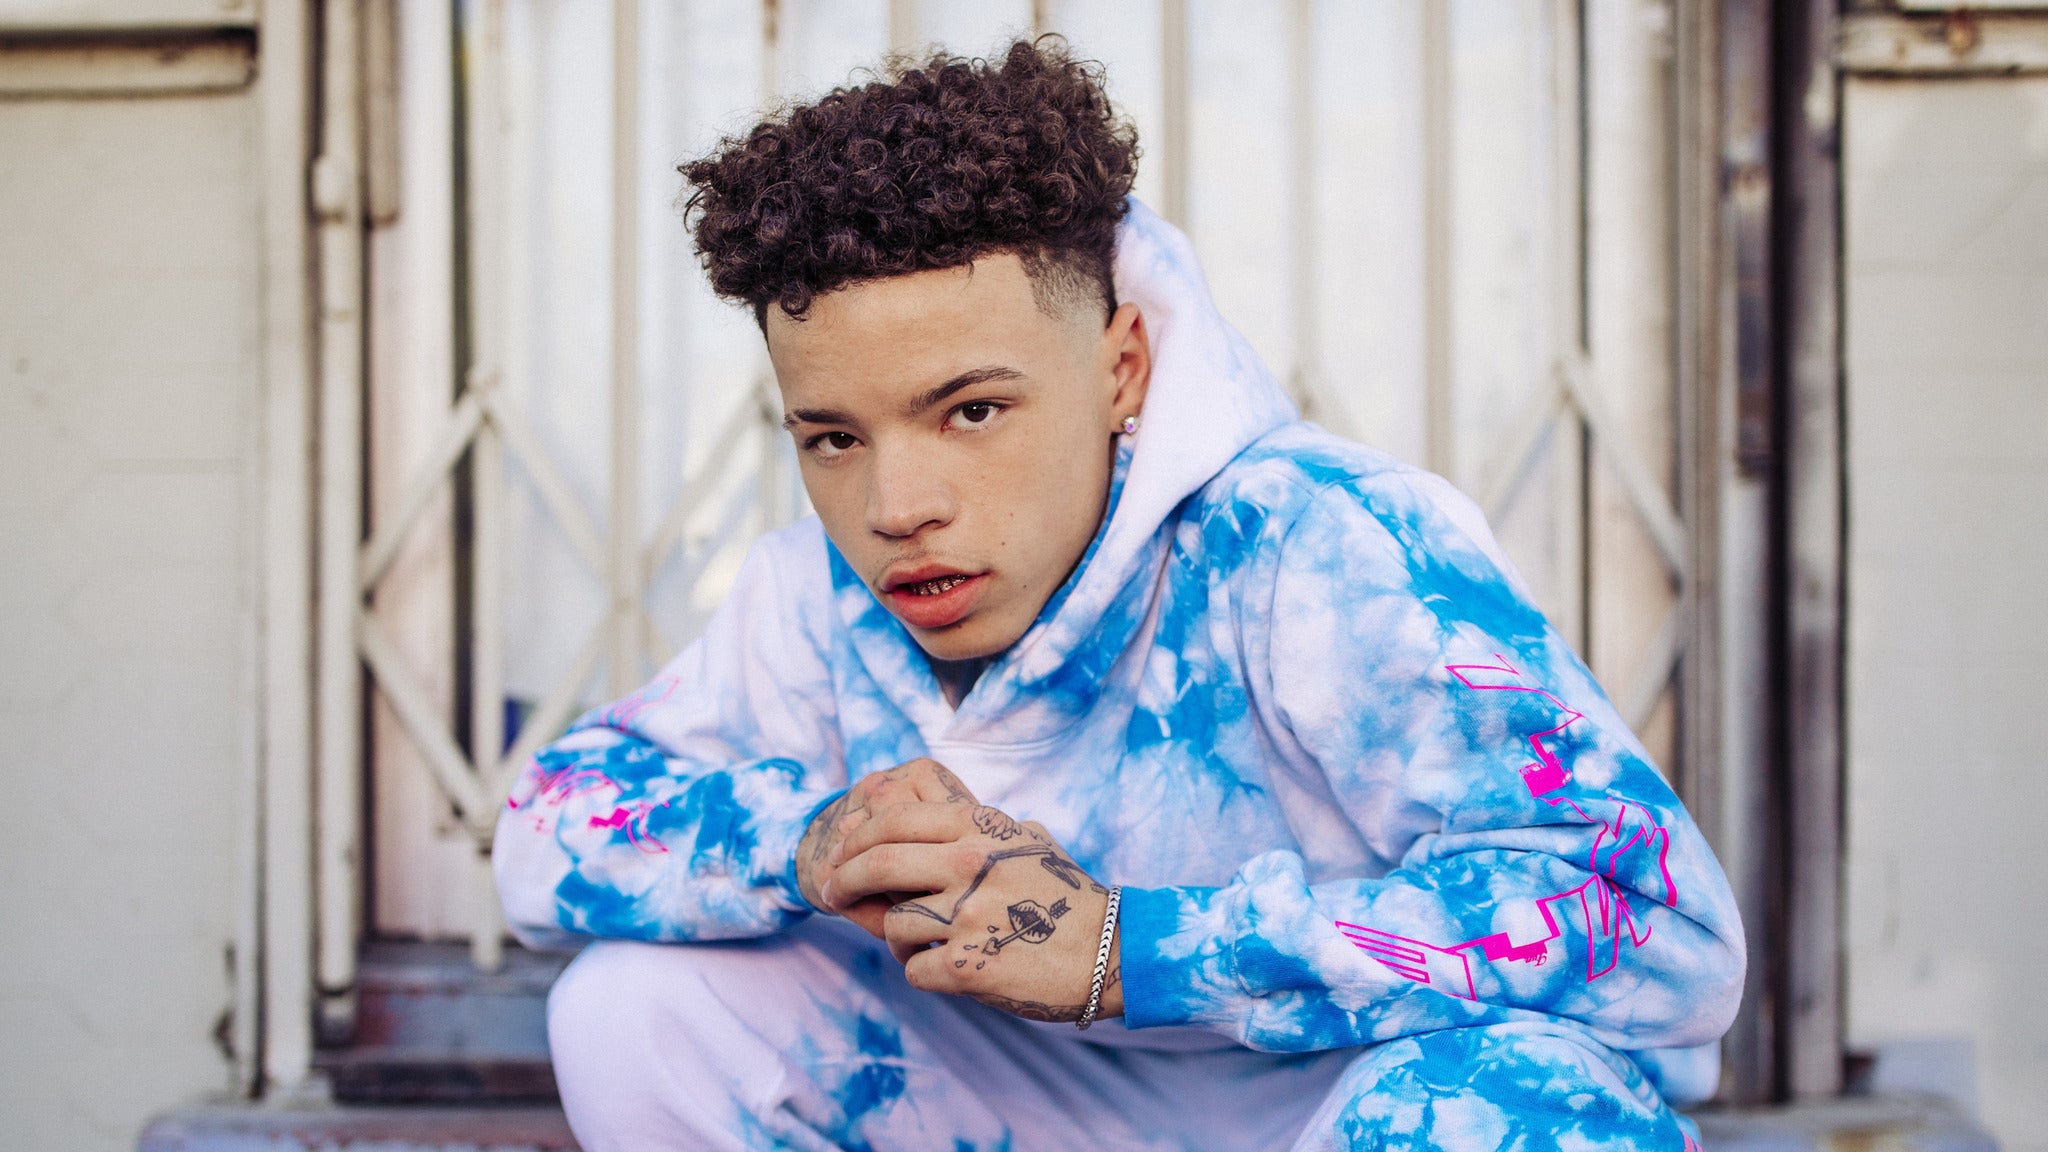 Lil Mosey - Certified Hitmaker North American Tour 2020 in San Diego promo photo for Live Nation Mobile App presale offer code